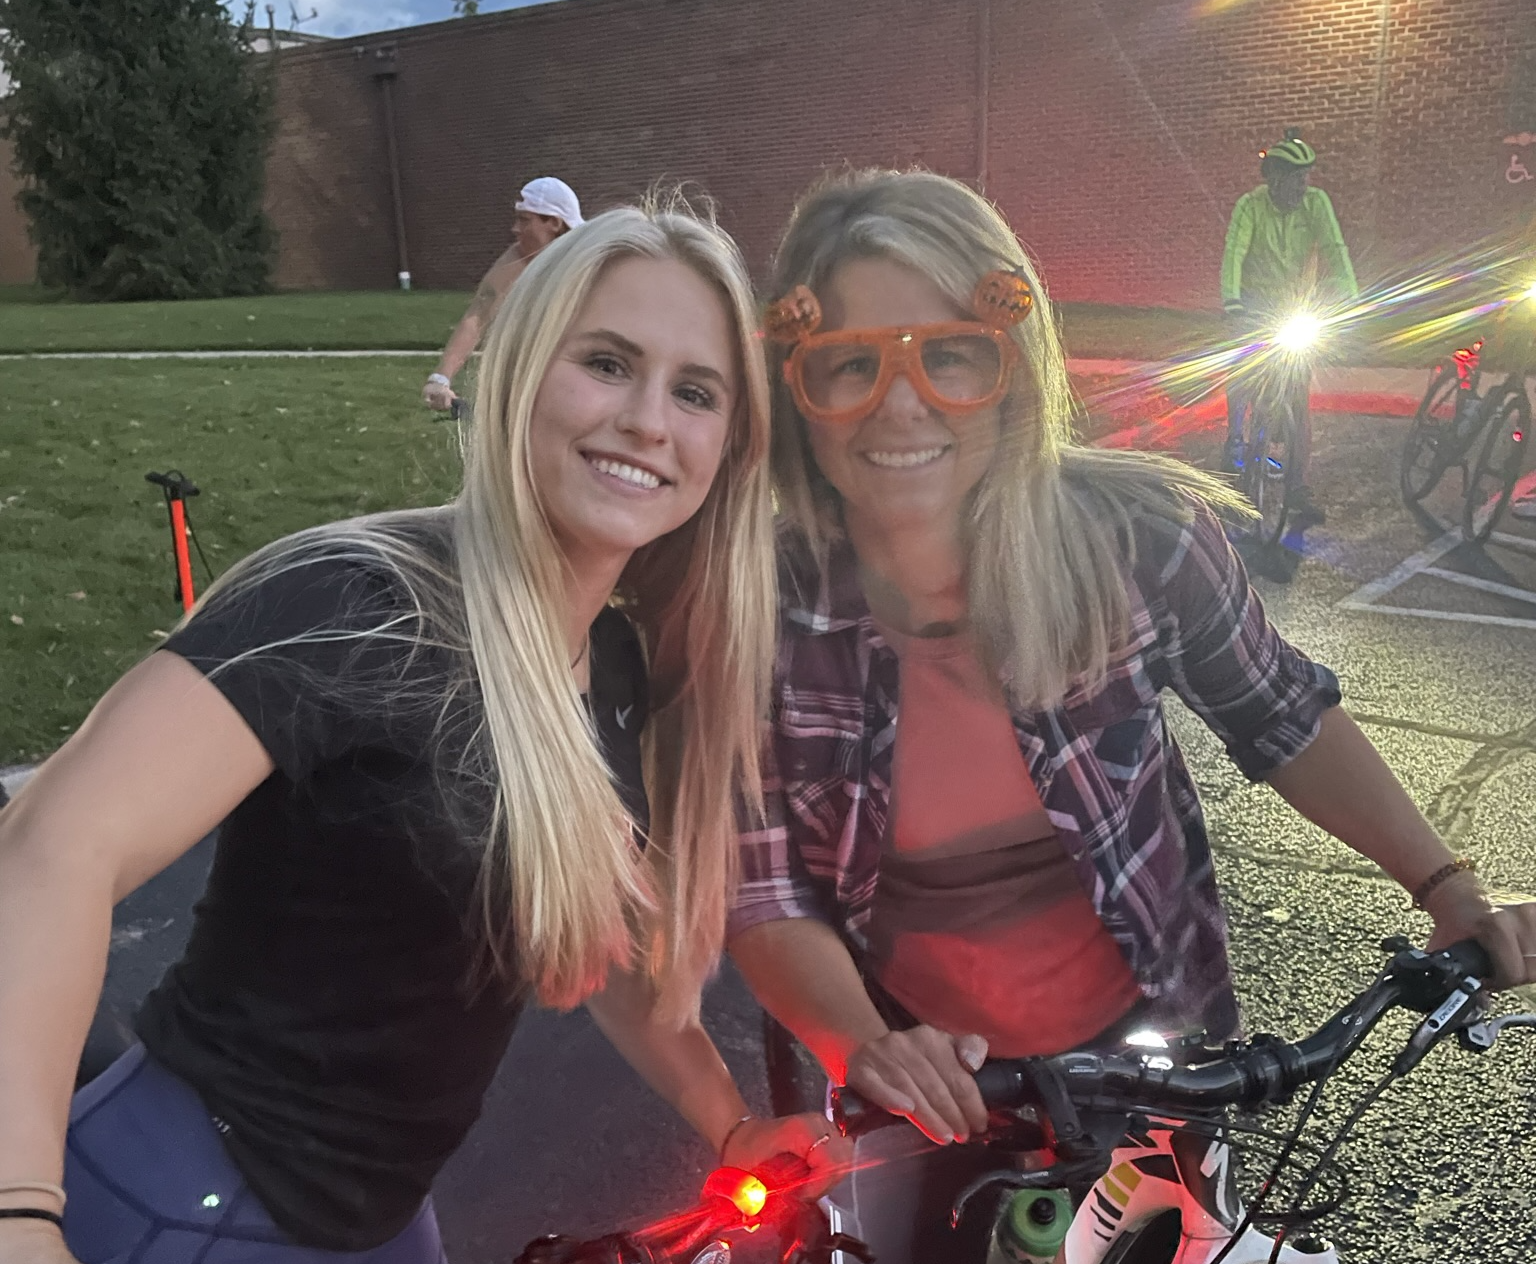 The Grace College Outdoors Club held a Nocturnal bike ride around Warsaw and Winona Lake on Sept. 24.